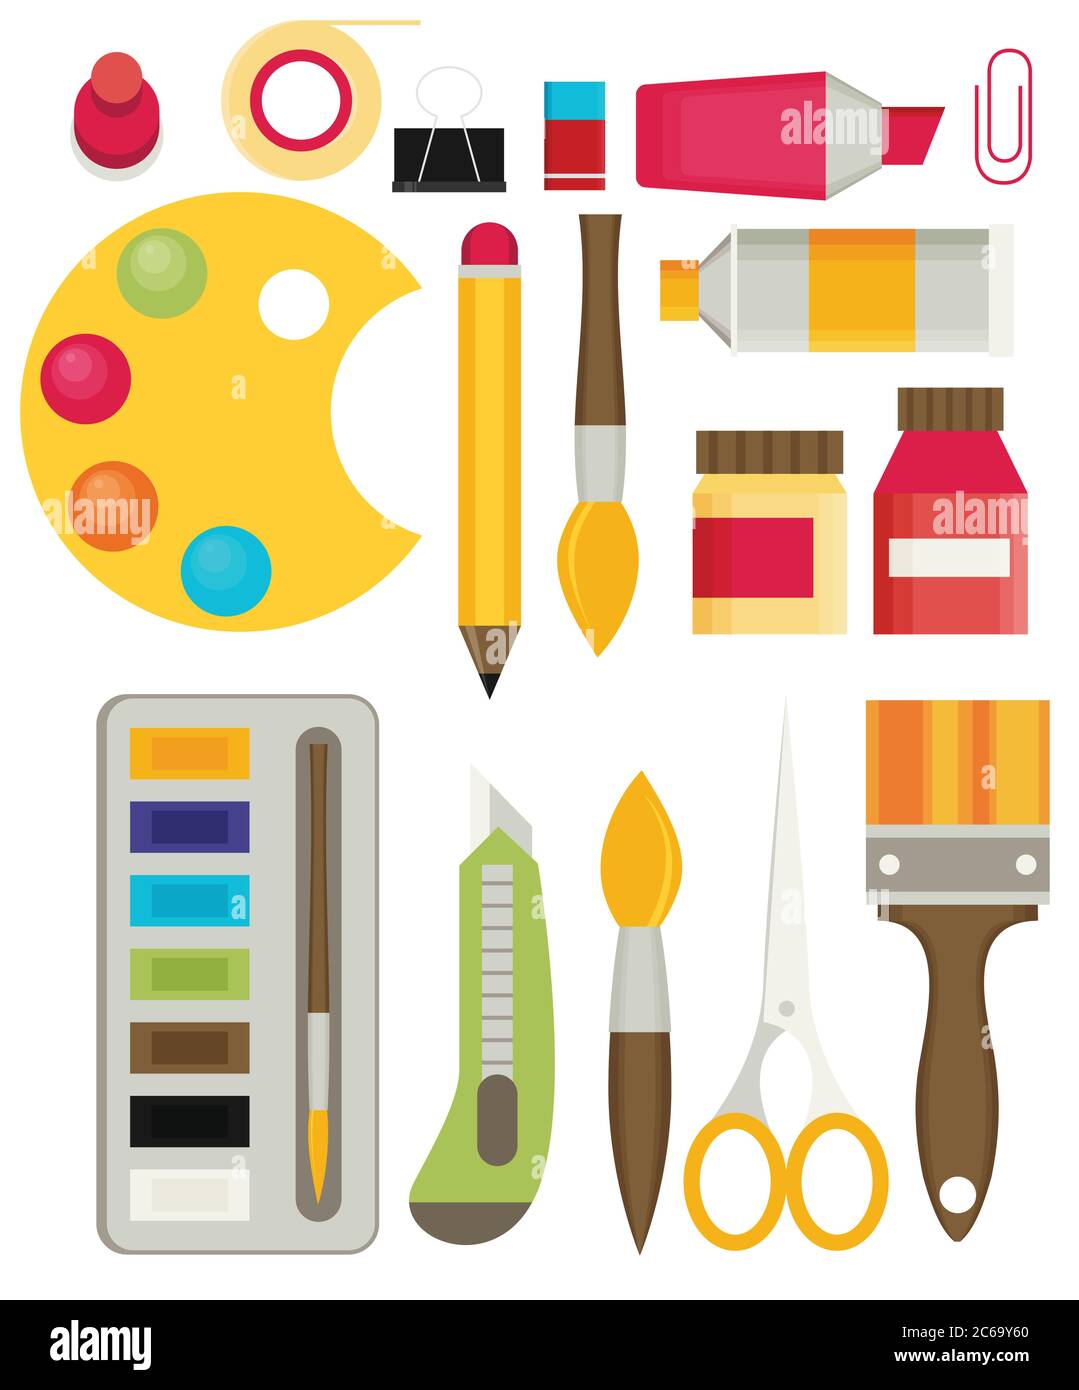 https://c8.alamy.com/comp/2C69Y60/colored-flat-design-vector-illustration-icons-set-of-art-supplies-art-instruments-for-painting-drawing-sketching-isolated-on-bright-stylish-backgro-2C69Y60.jpg